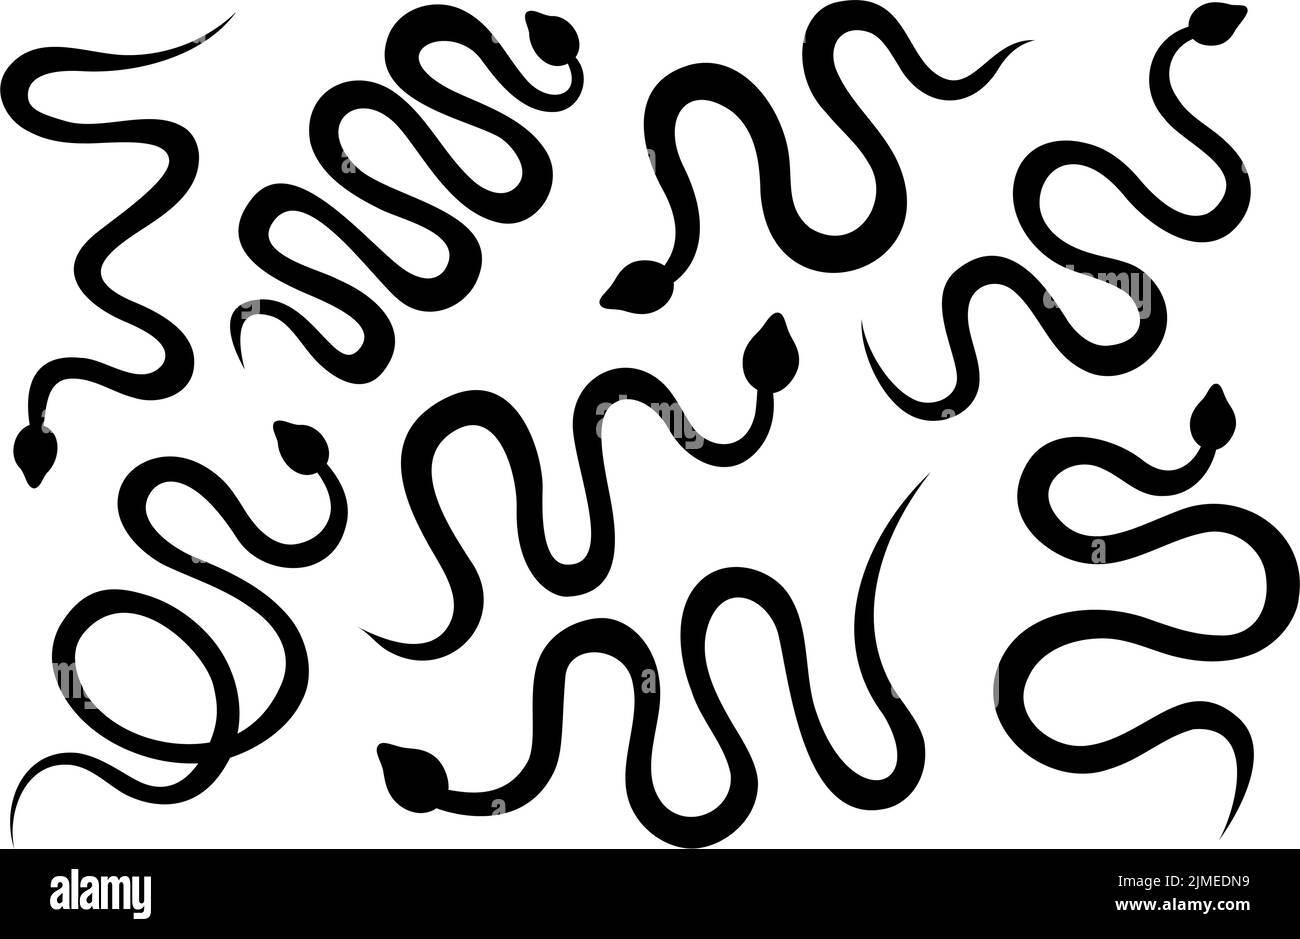 Black snakes silhouettes set. Tropical toxic reptiles. Dark hand drawn poisonous snakes. Dangerous exotic rattlesnakes isolated on white background. Stock Vector